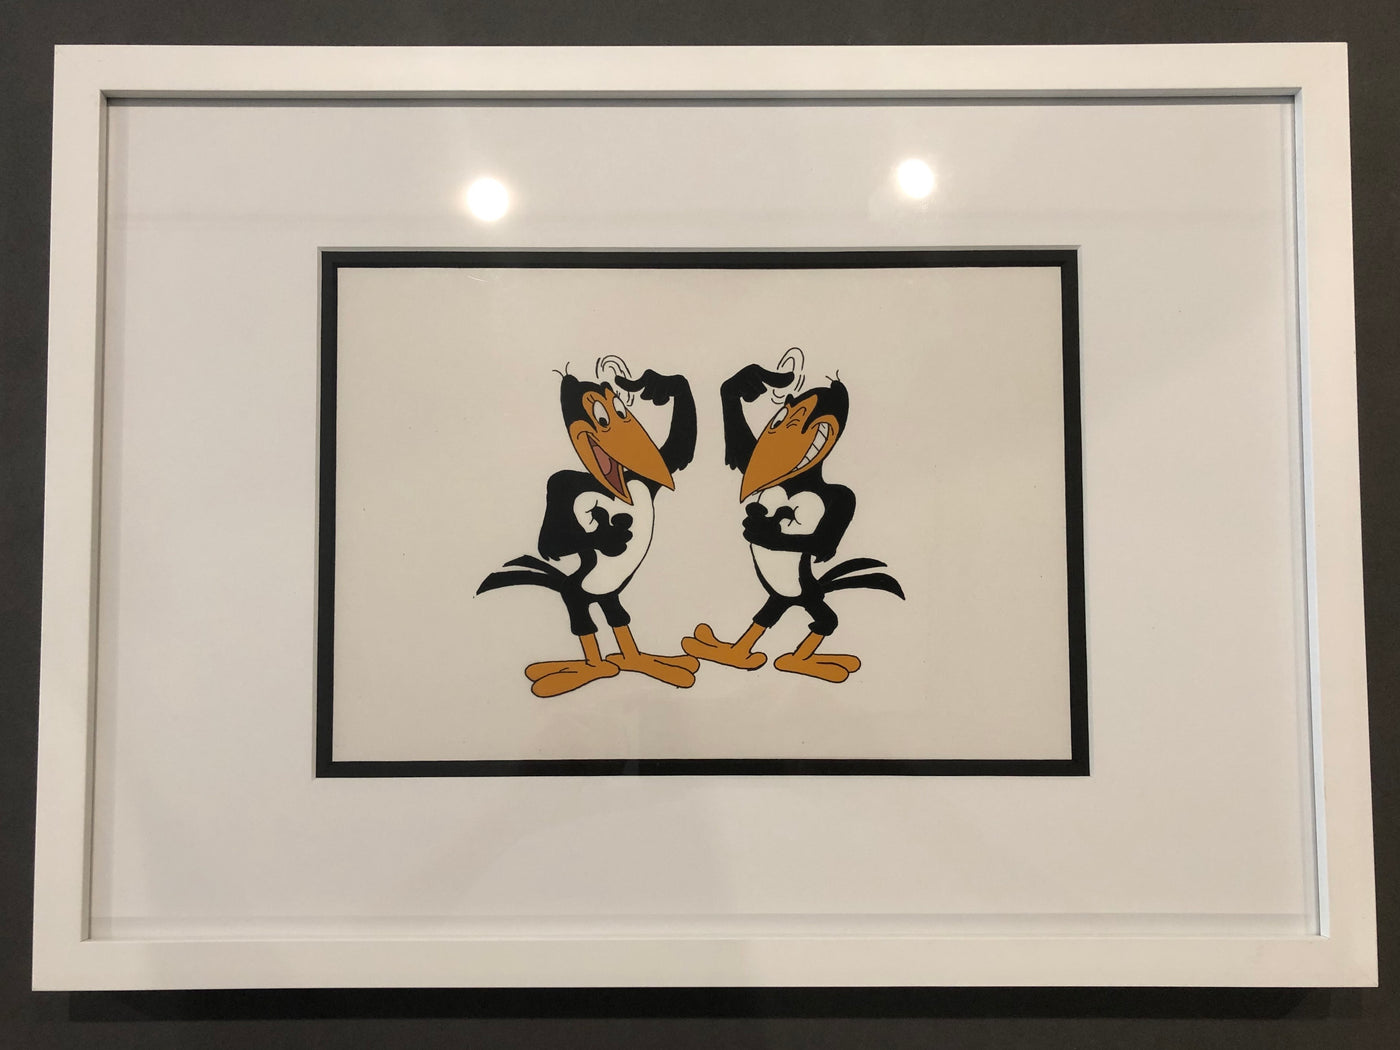 Production Cel of Heckle and Jeckle